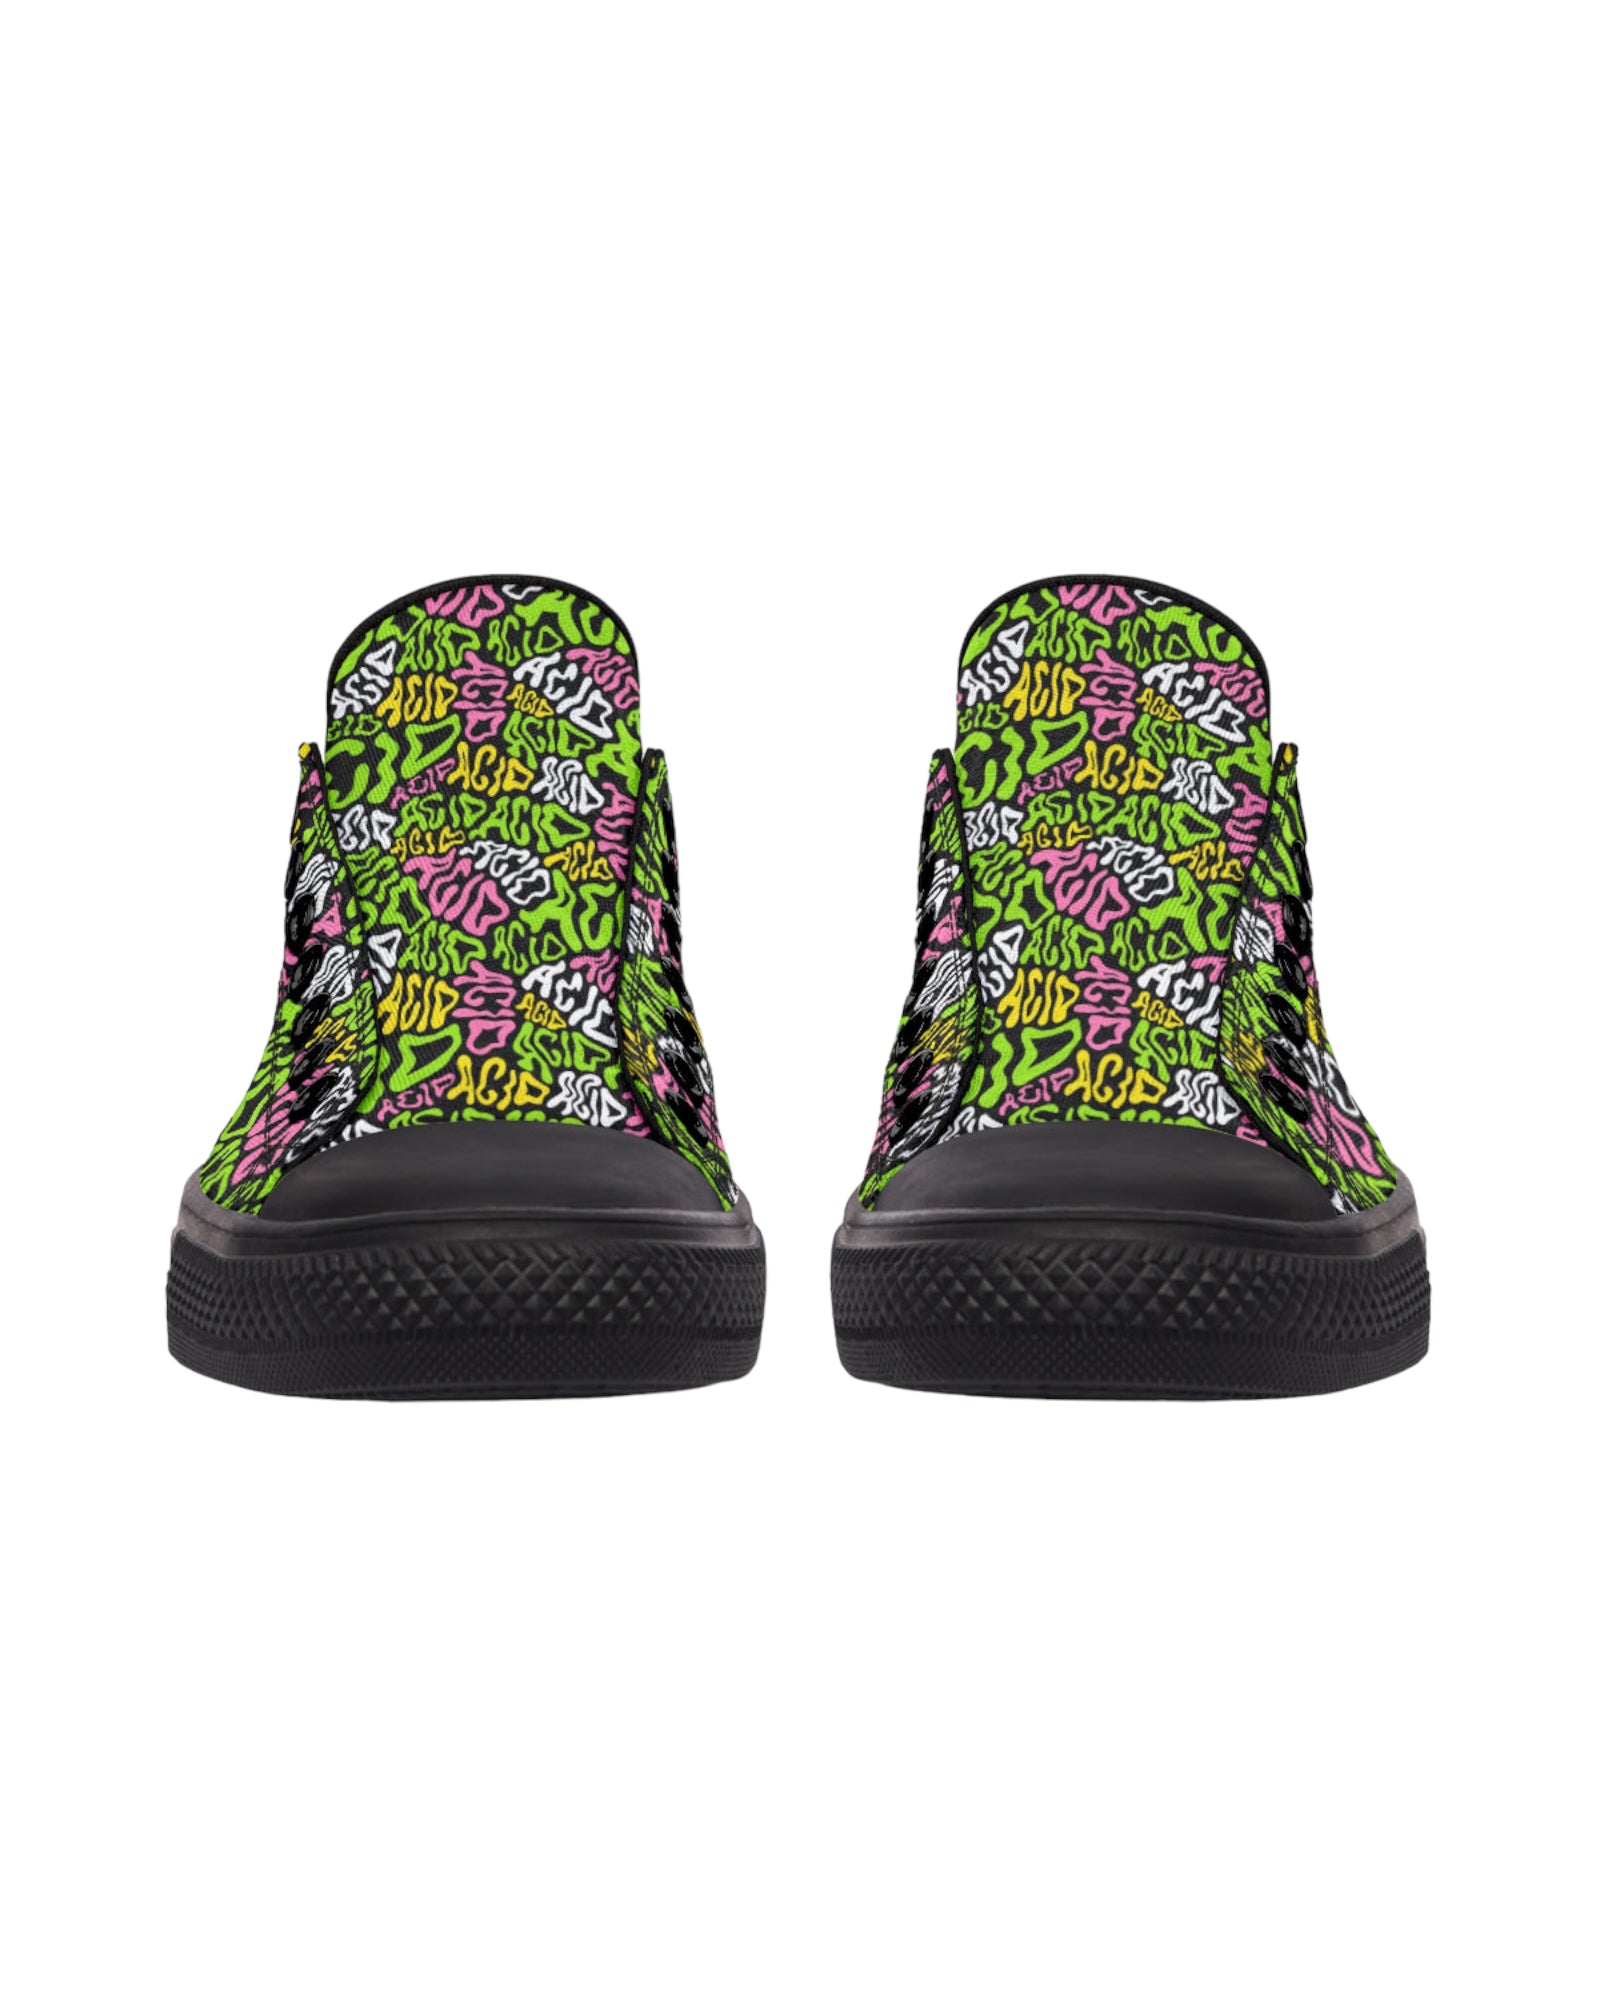 Candy Acid Festival Low Tops